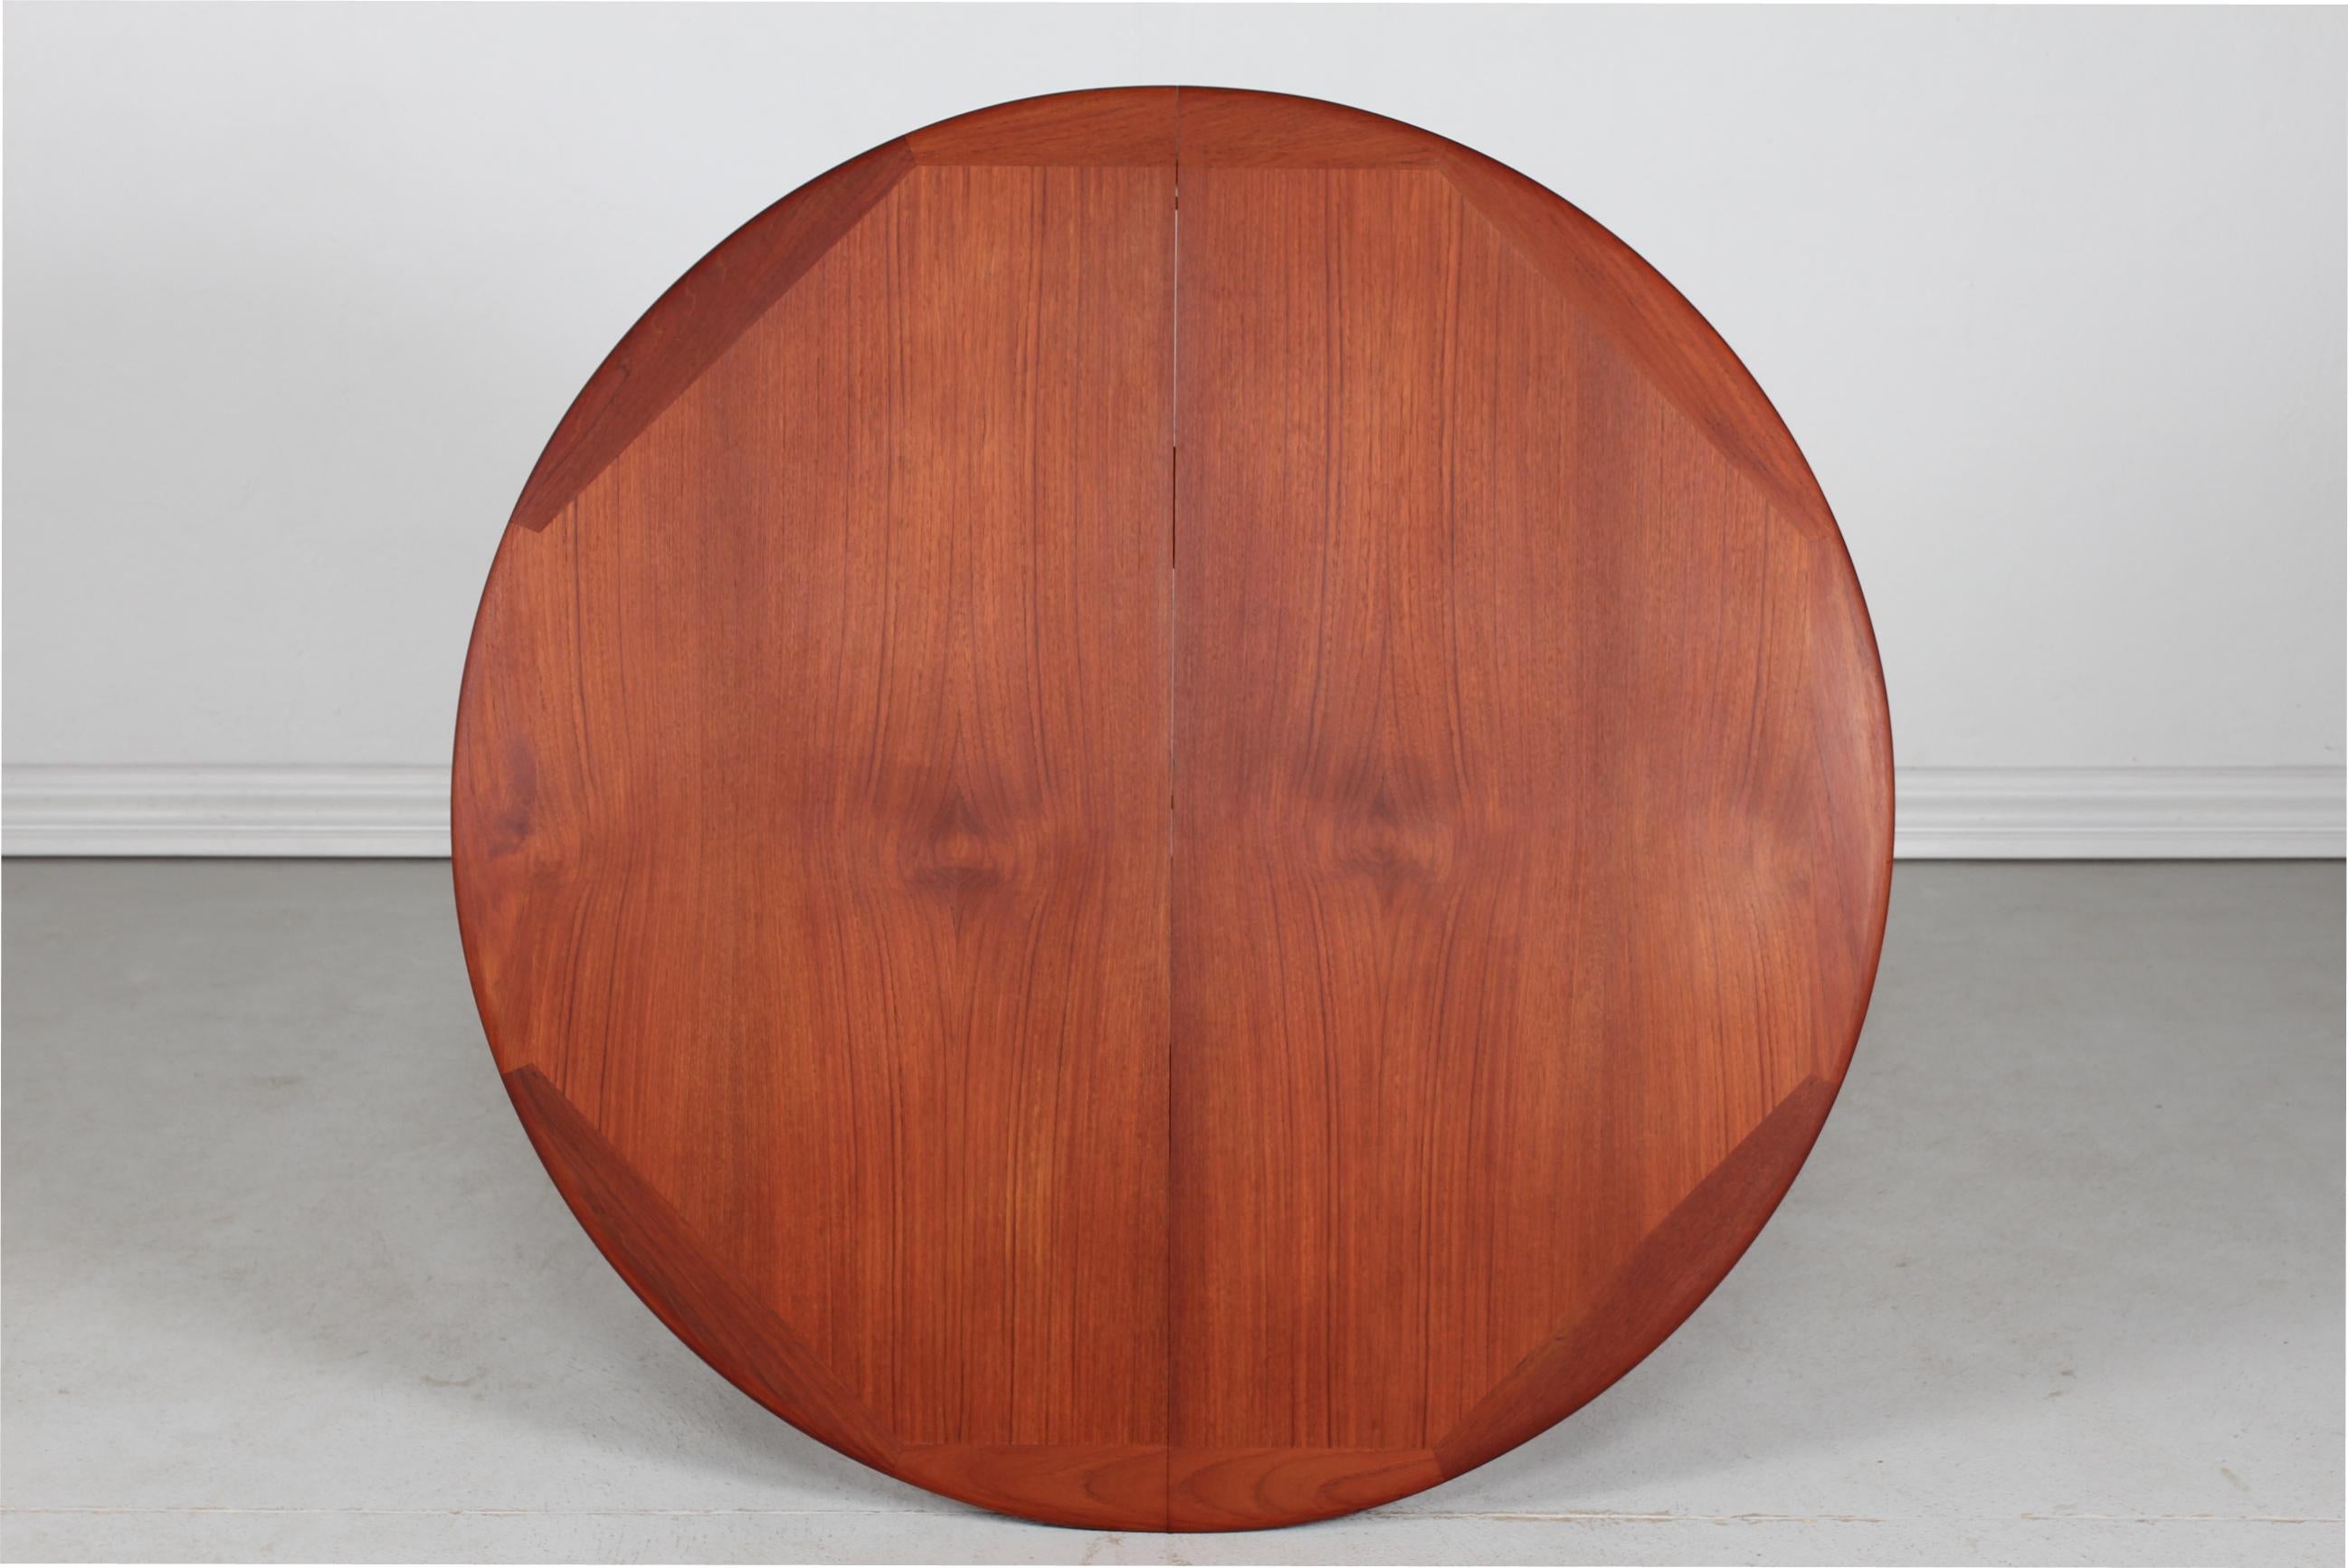 Woodwork Danish Modern Round Dining Table of Teak with Leaves by Danish Cabinetmaker 70s